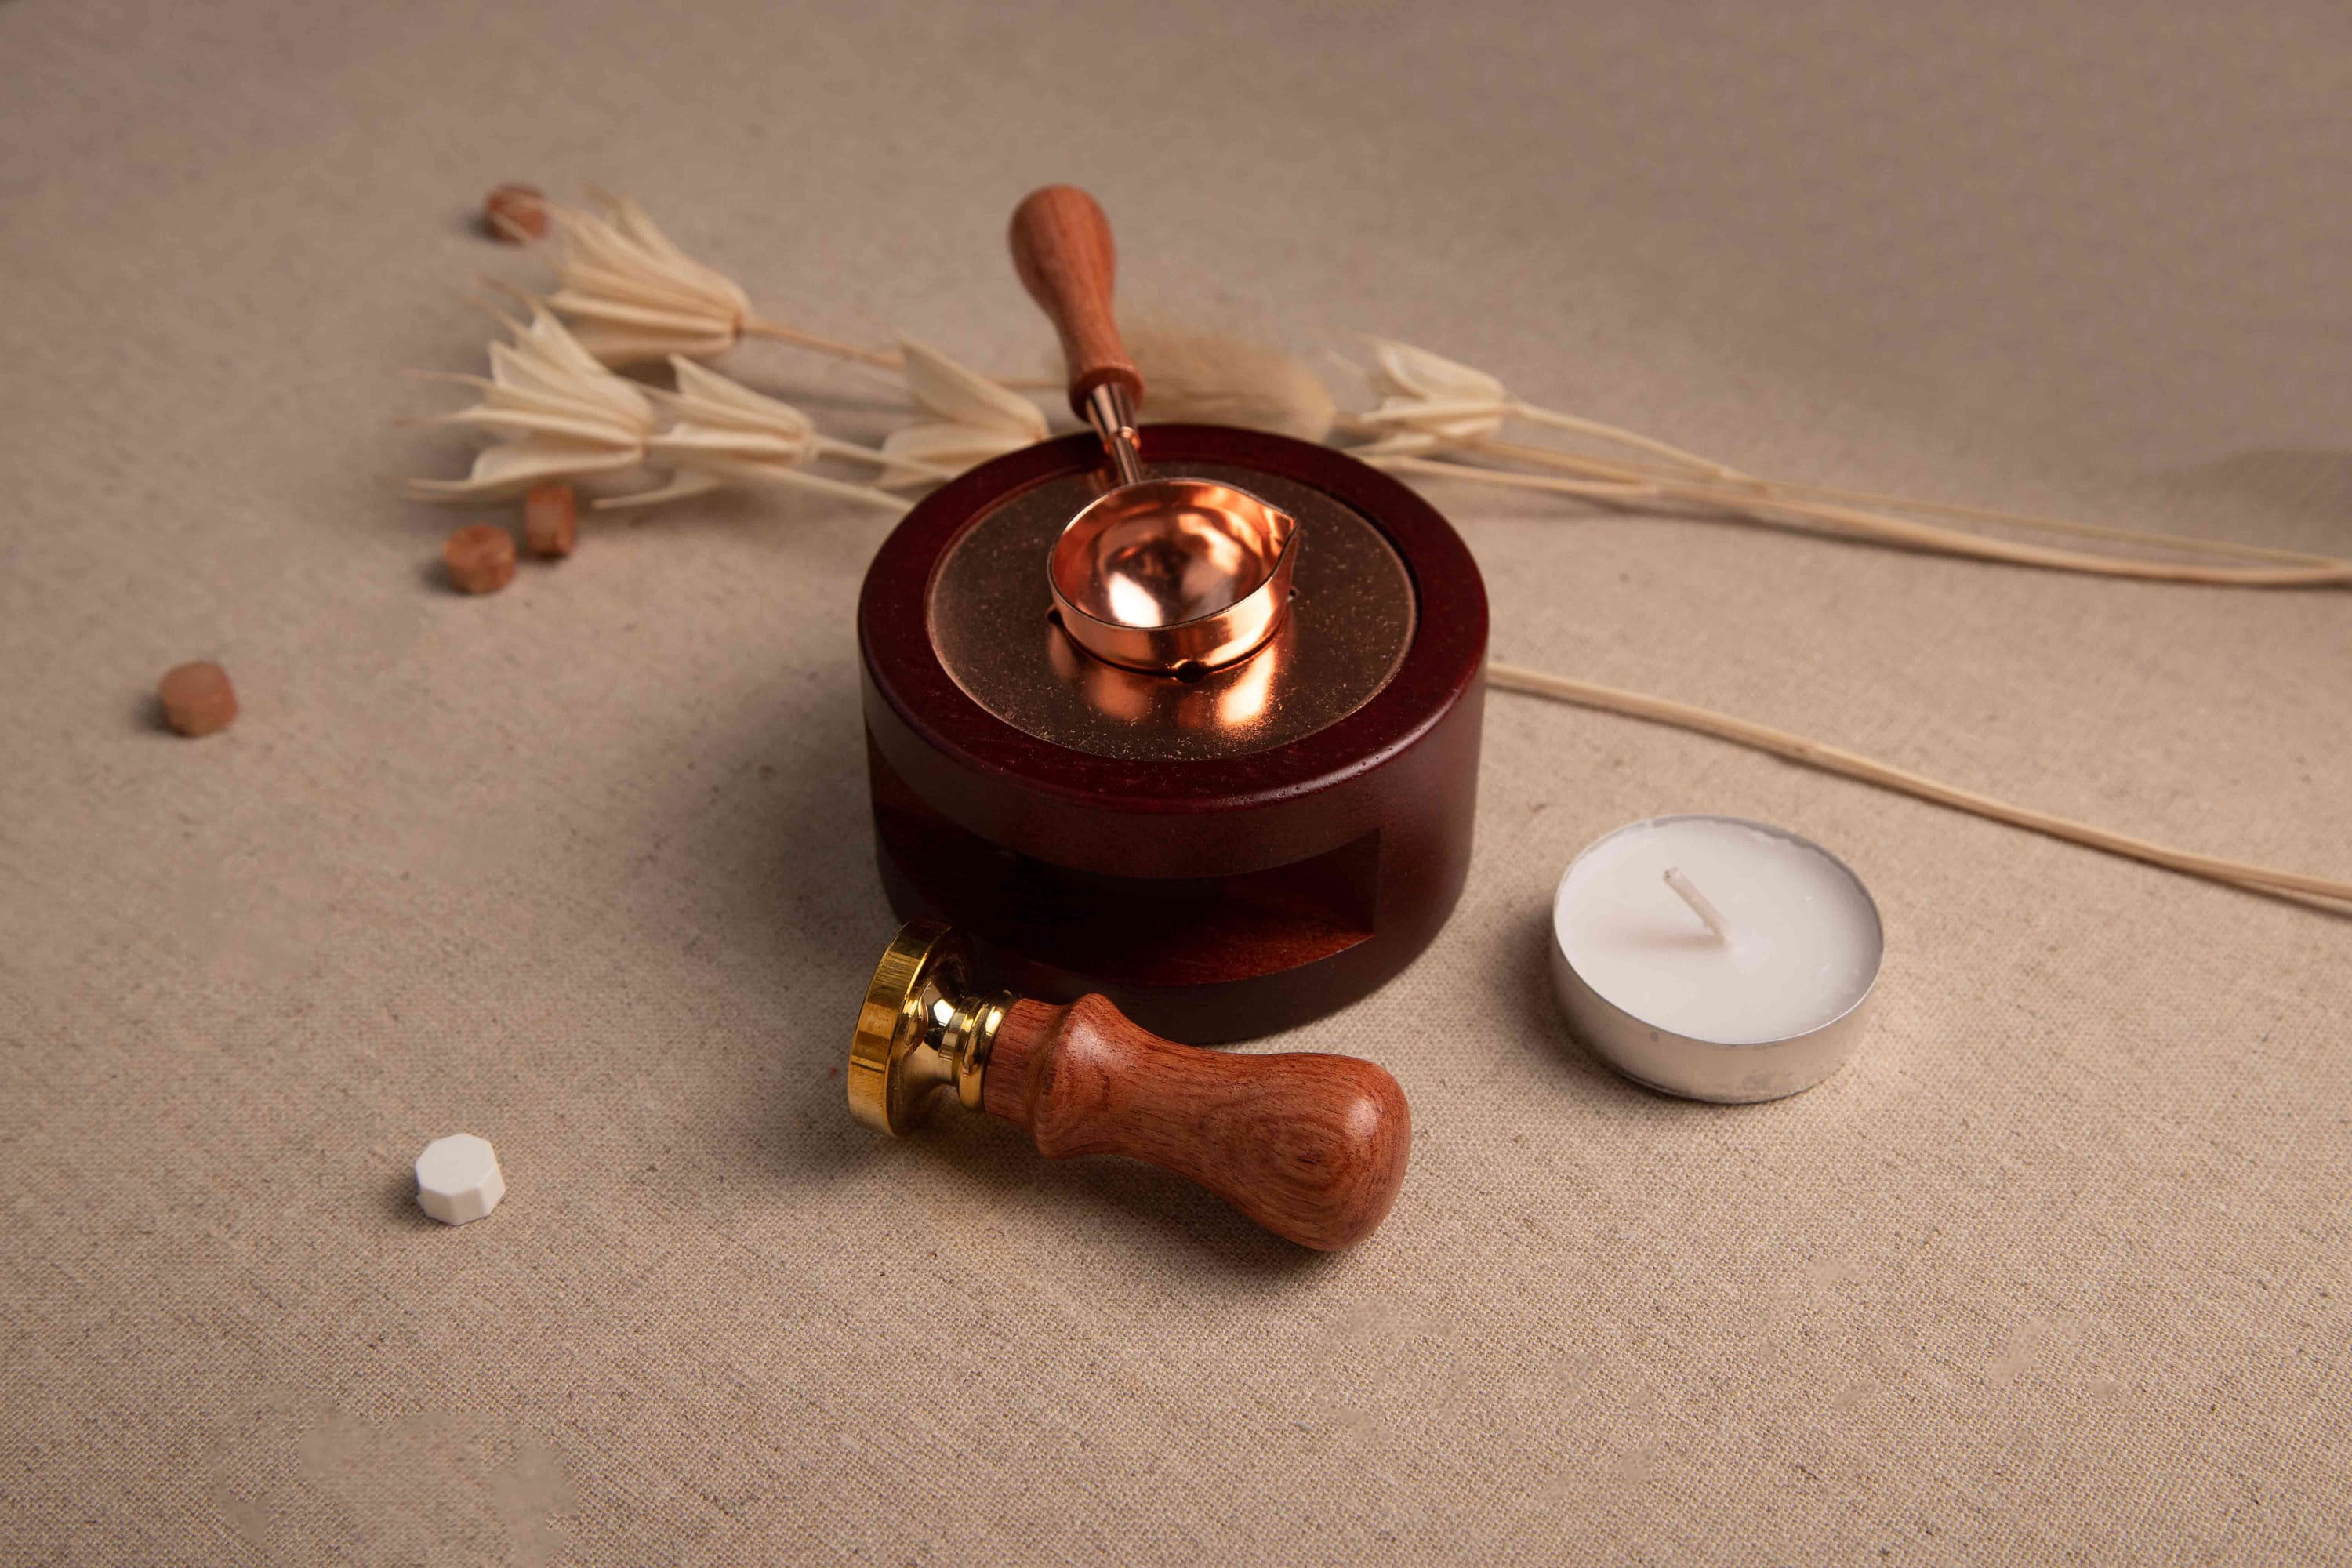 Deluxe Wax Melting Pot With Spoon and Spirit Burner 